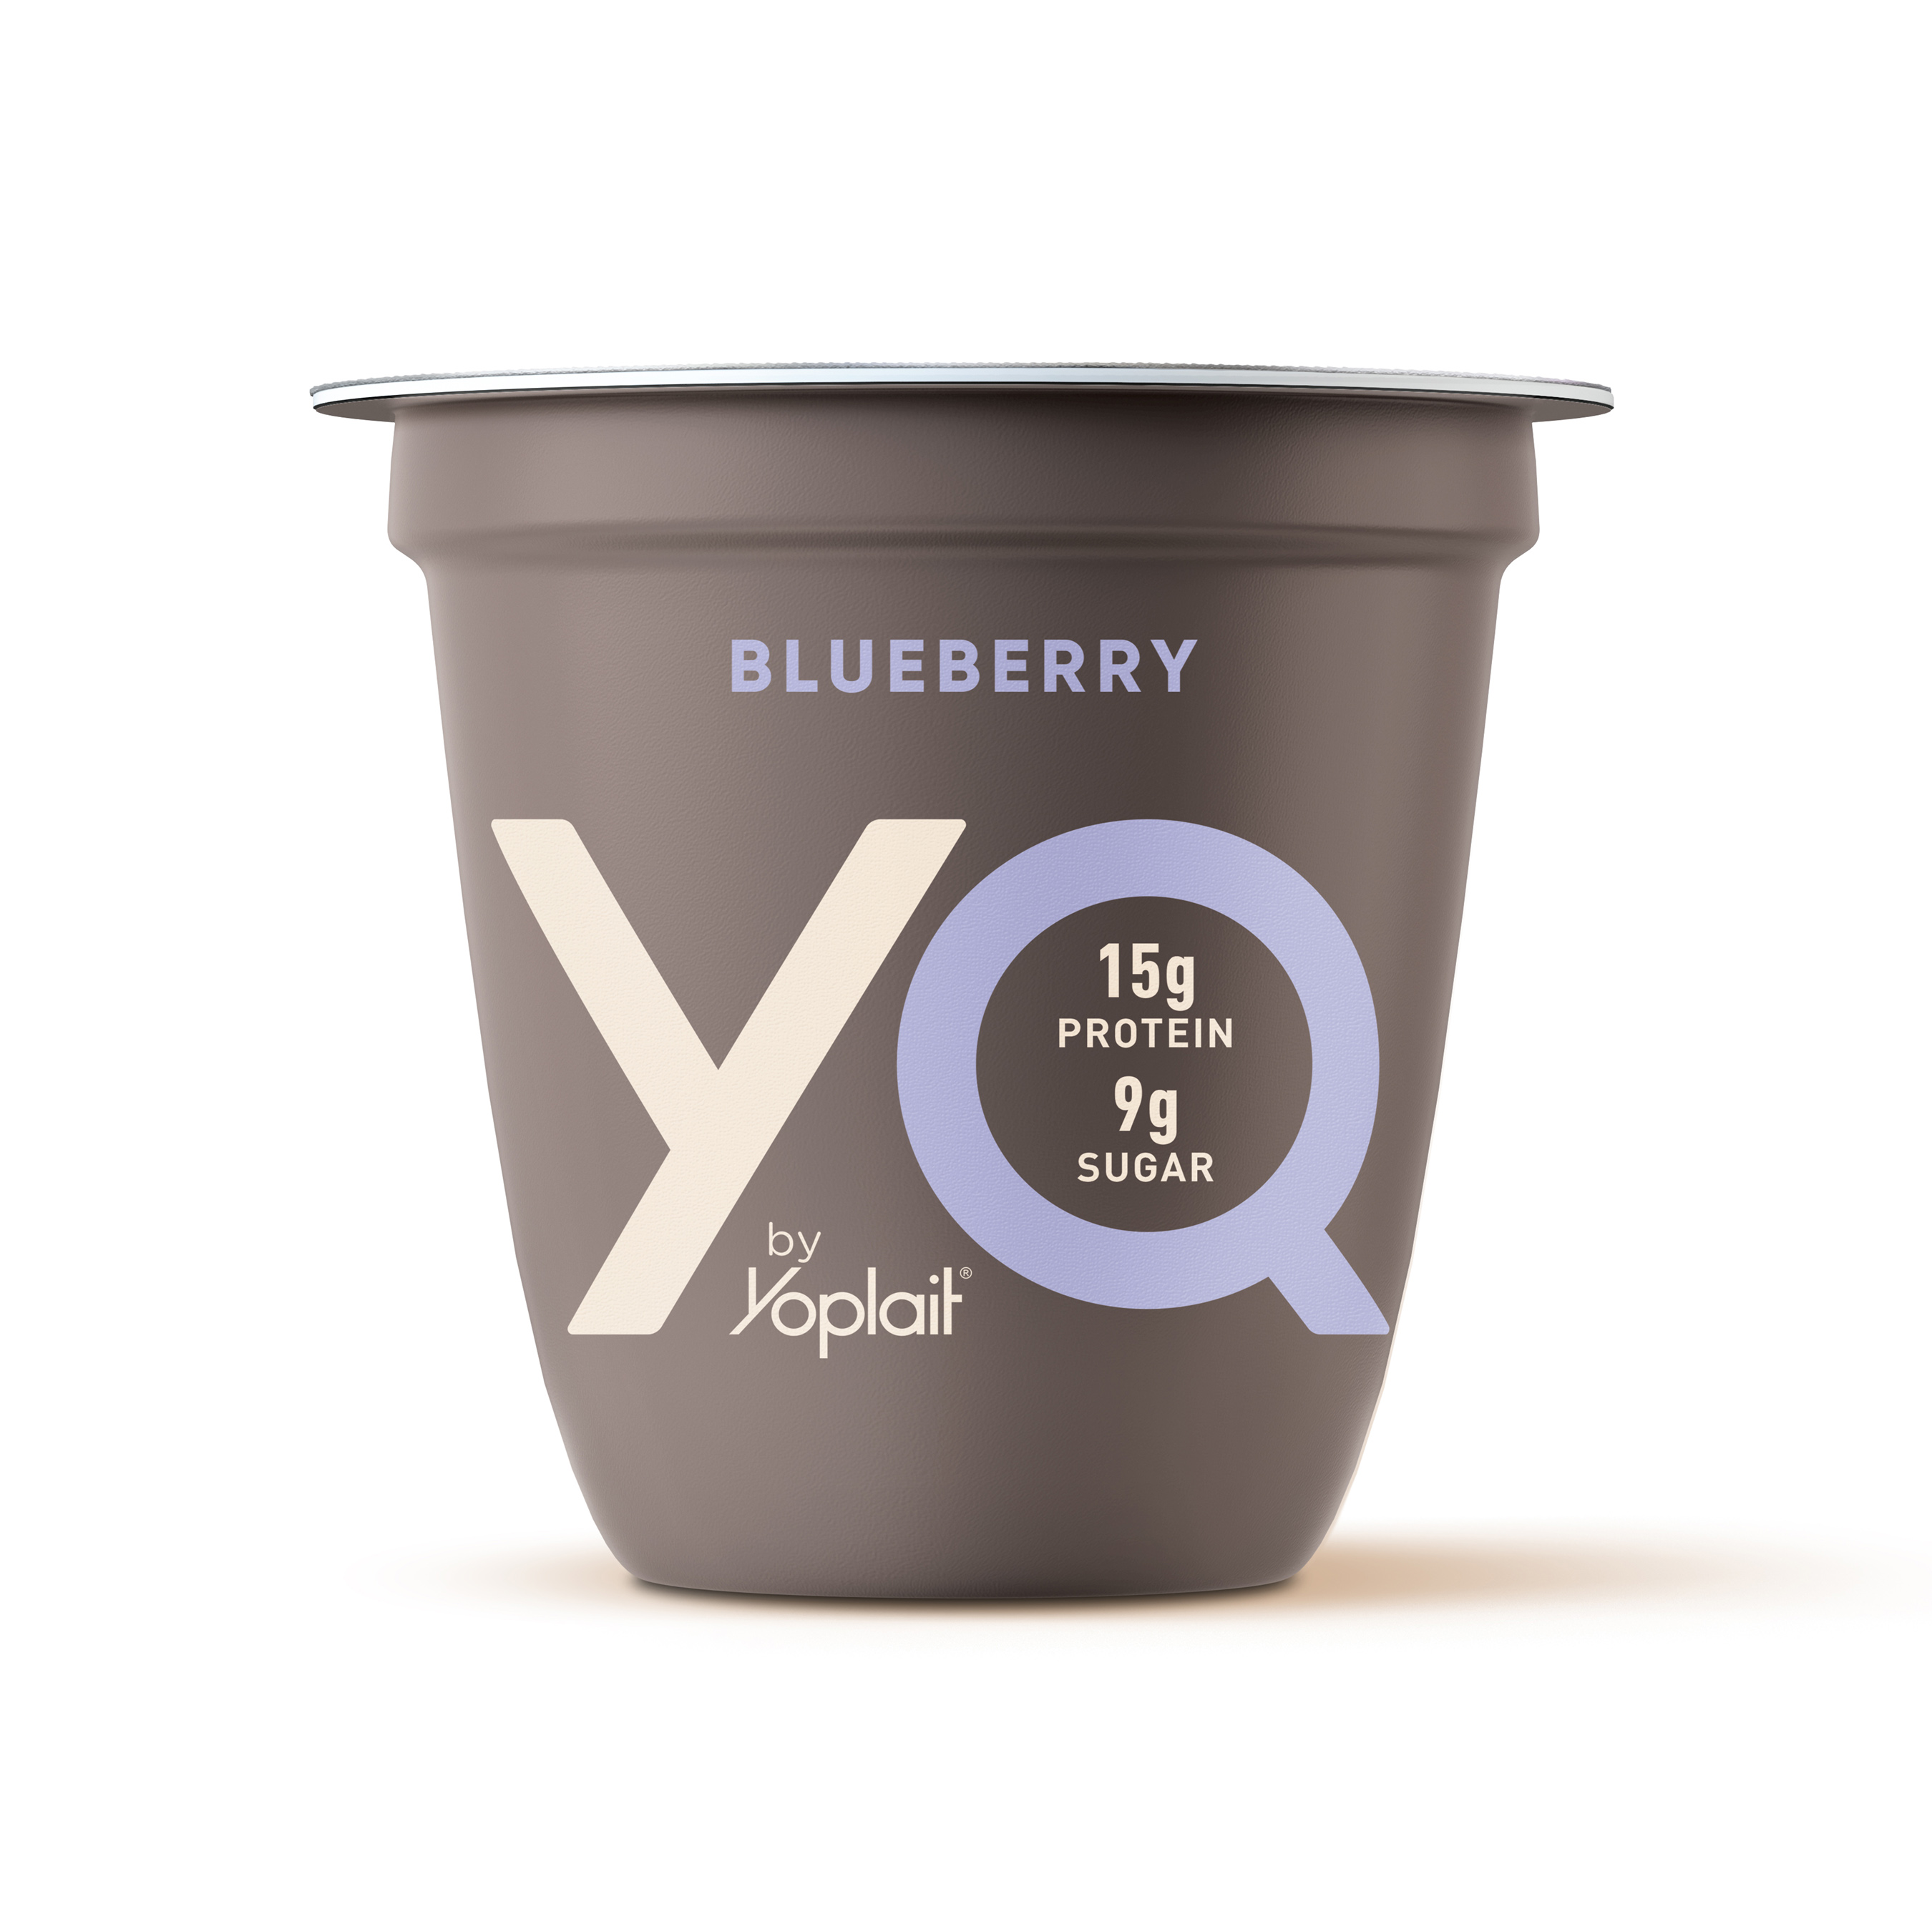 YQ by Yoplait's flavored varieties - including Blueberry - deliver 9 grams of sugar and are lightly sweetened with just the right amount of cane sugar, real fruit and natural flavors.